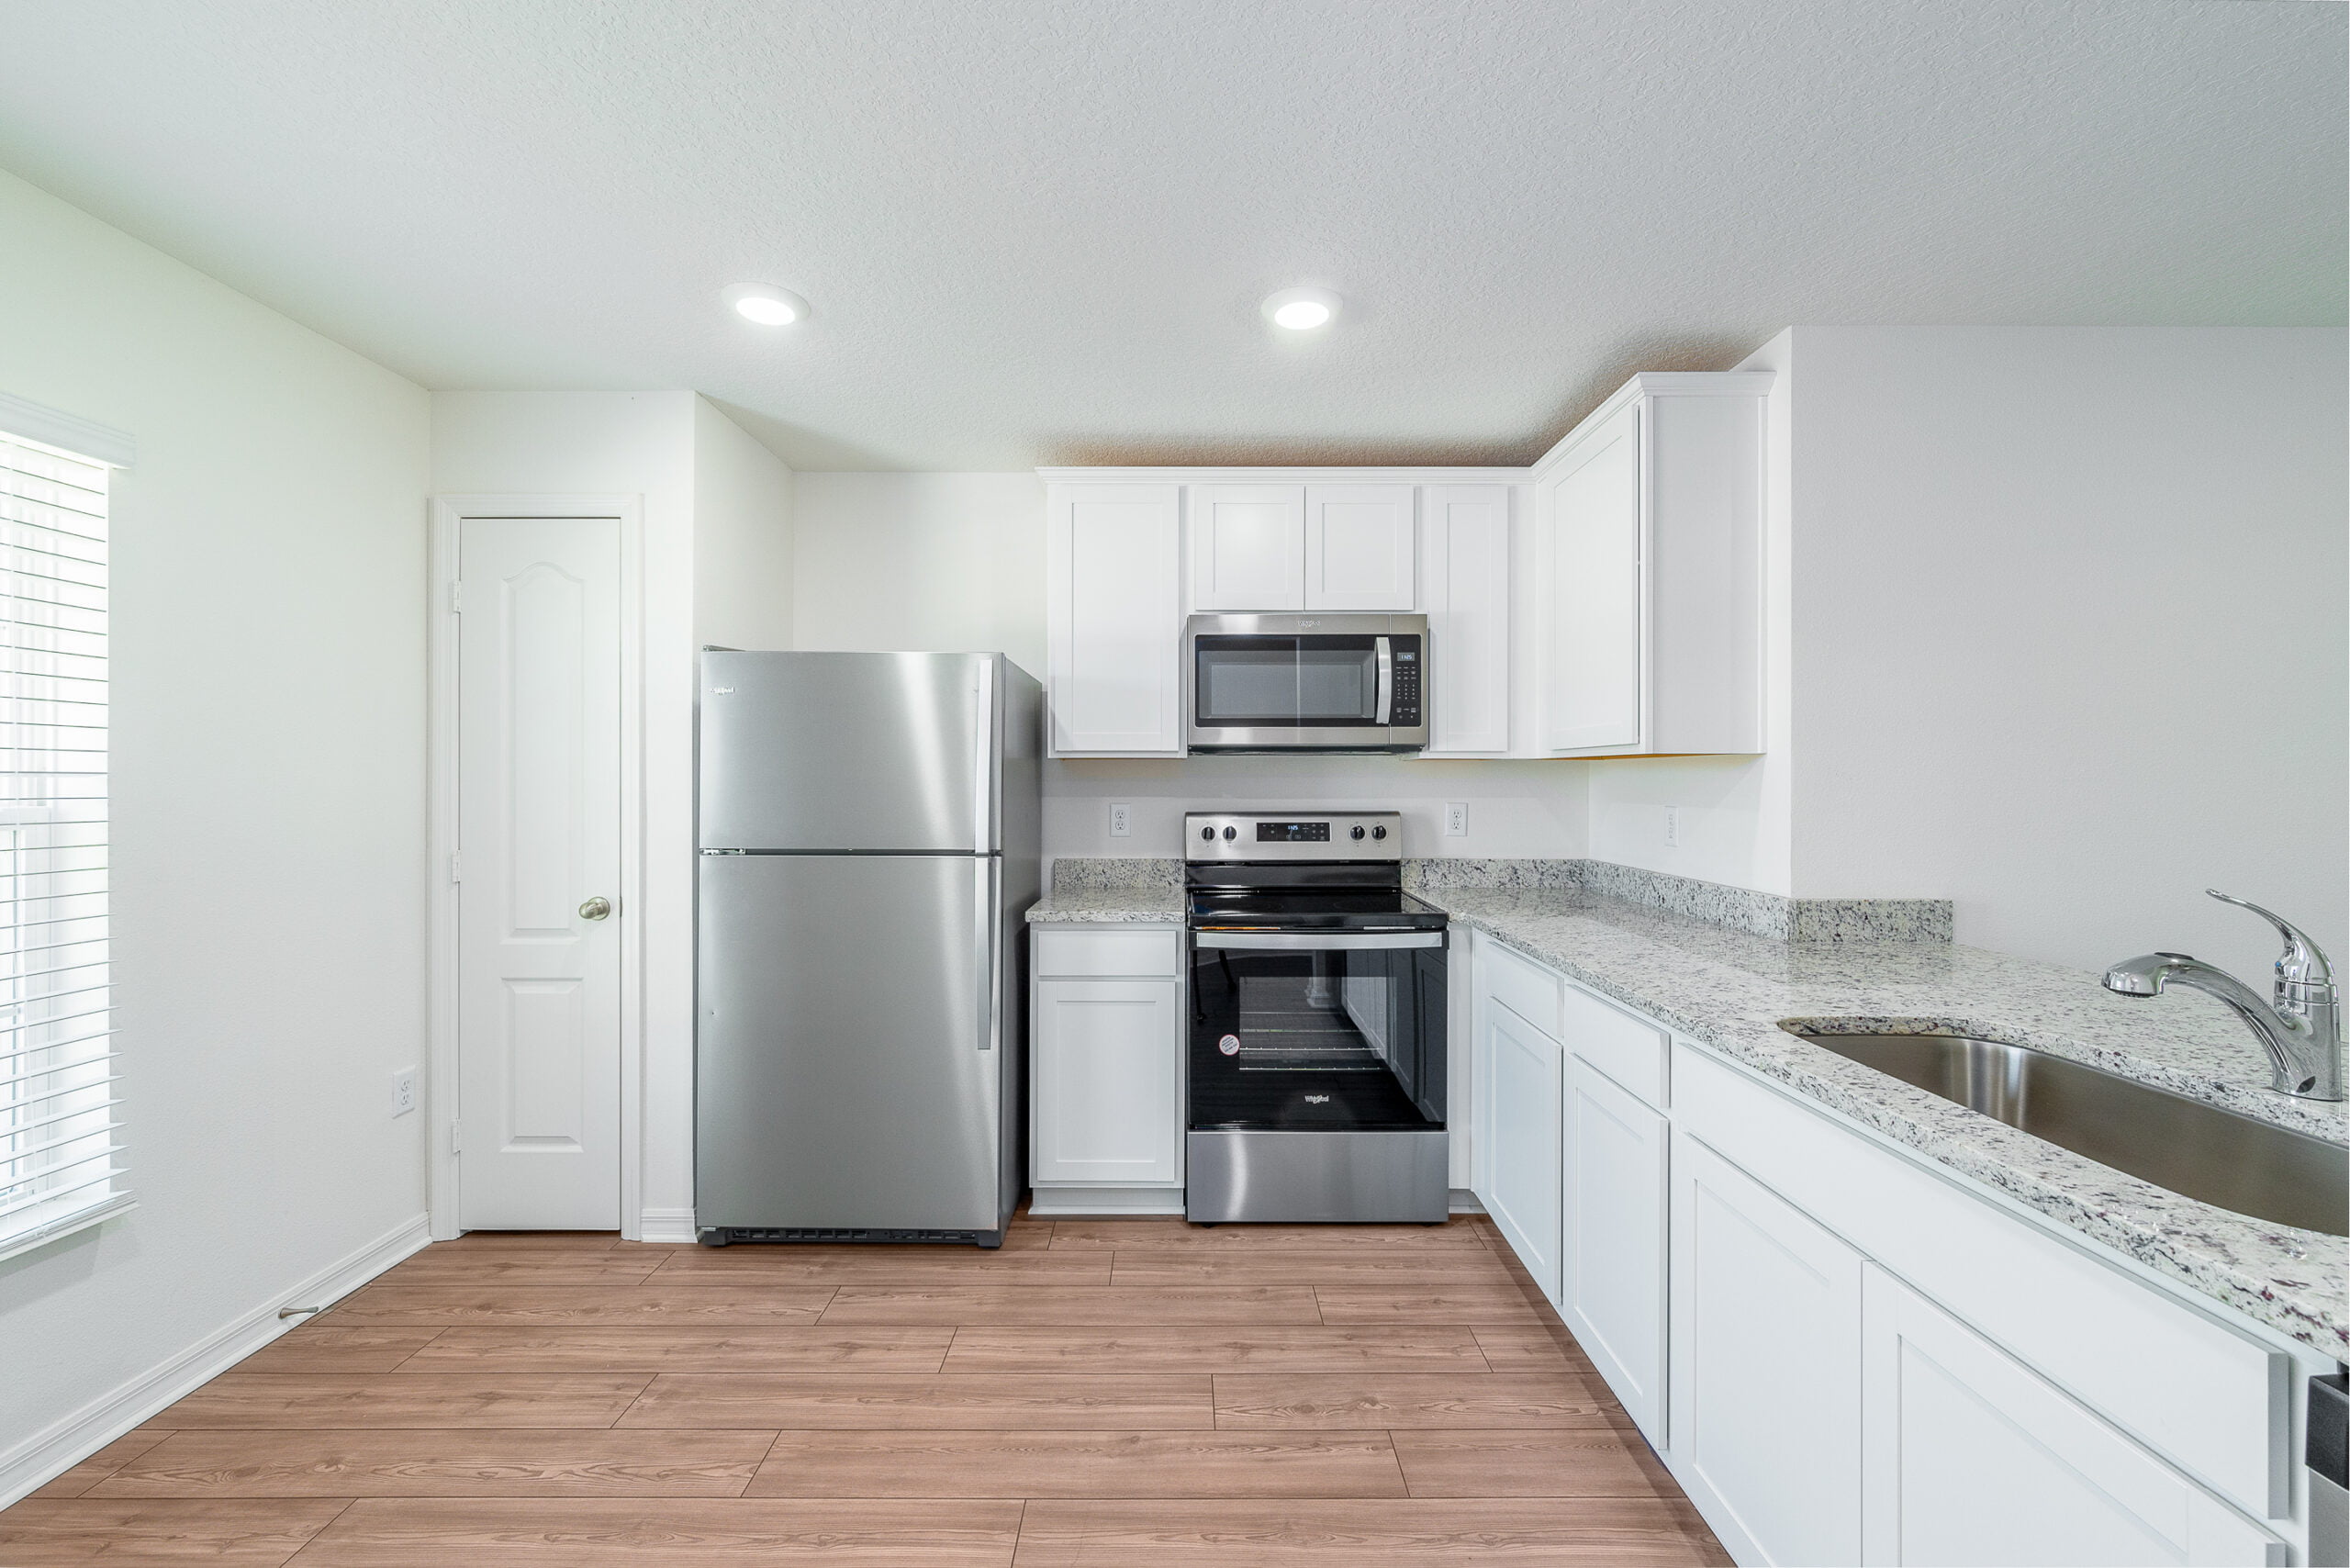 This photo showcases a modern kitchen with white cabinetry, stainless steel appliances, granite countertops, and recessed lighting. The flooring is a laminate wood, and natural light filters in through the blinds. The space is clean and uncluttered, suggesting a new or recently updated interior.